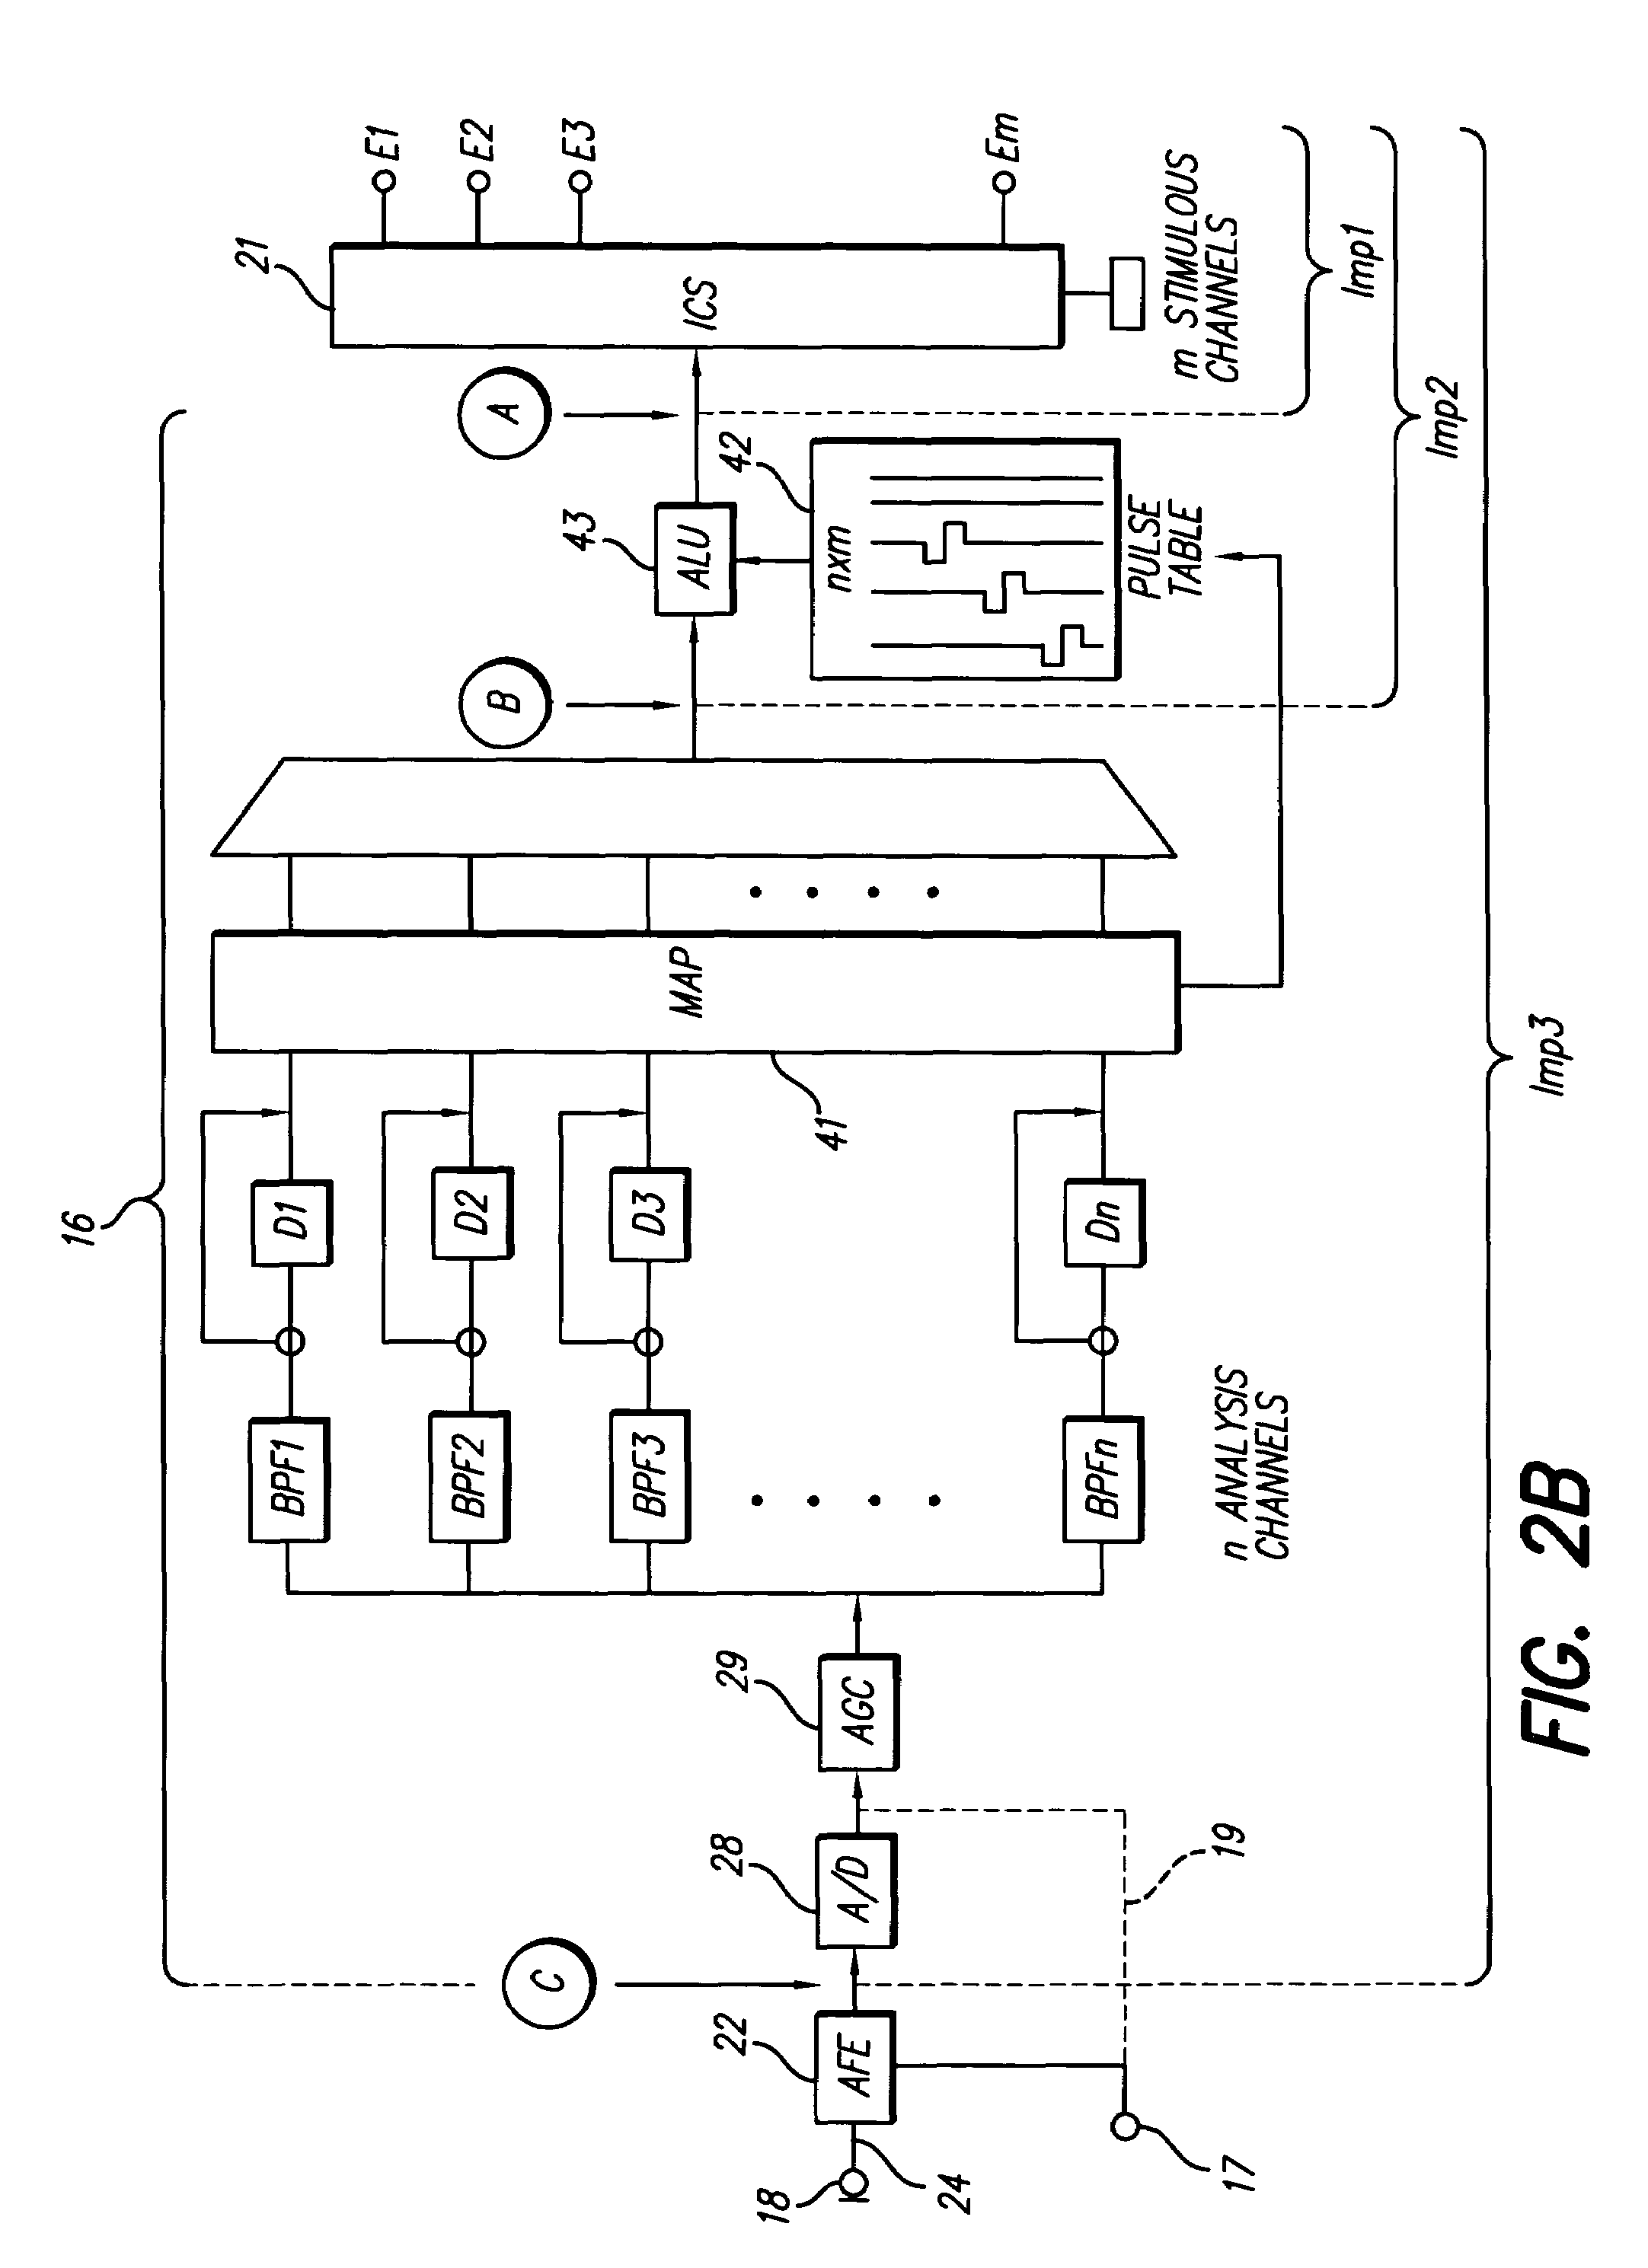 Method and system for generating a cochlear implant program using multi-electrode stimulation to elicit the electrically-evoked compound action potential